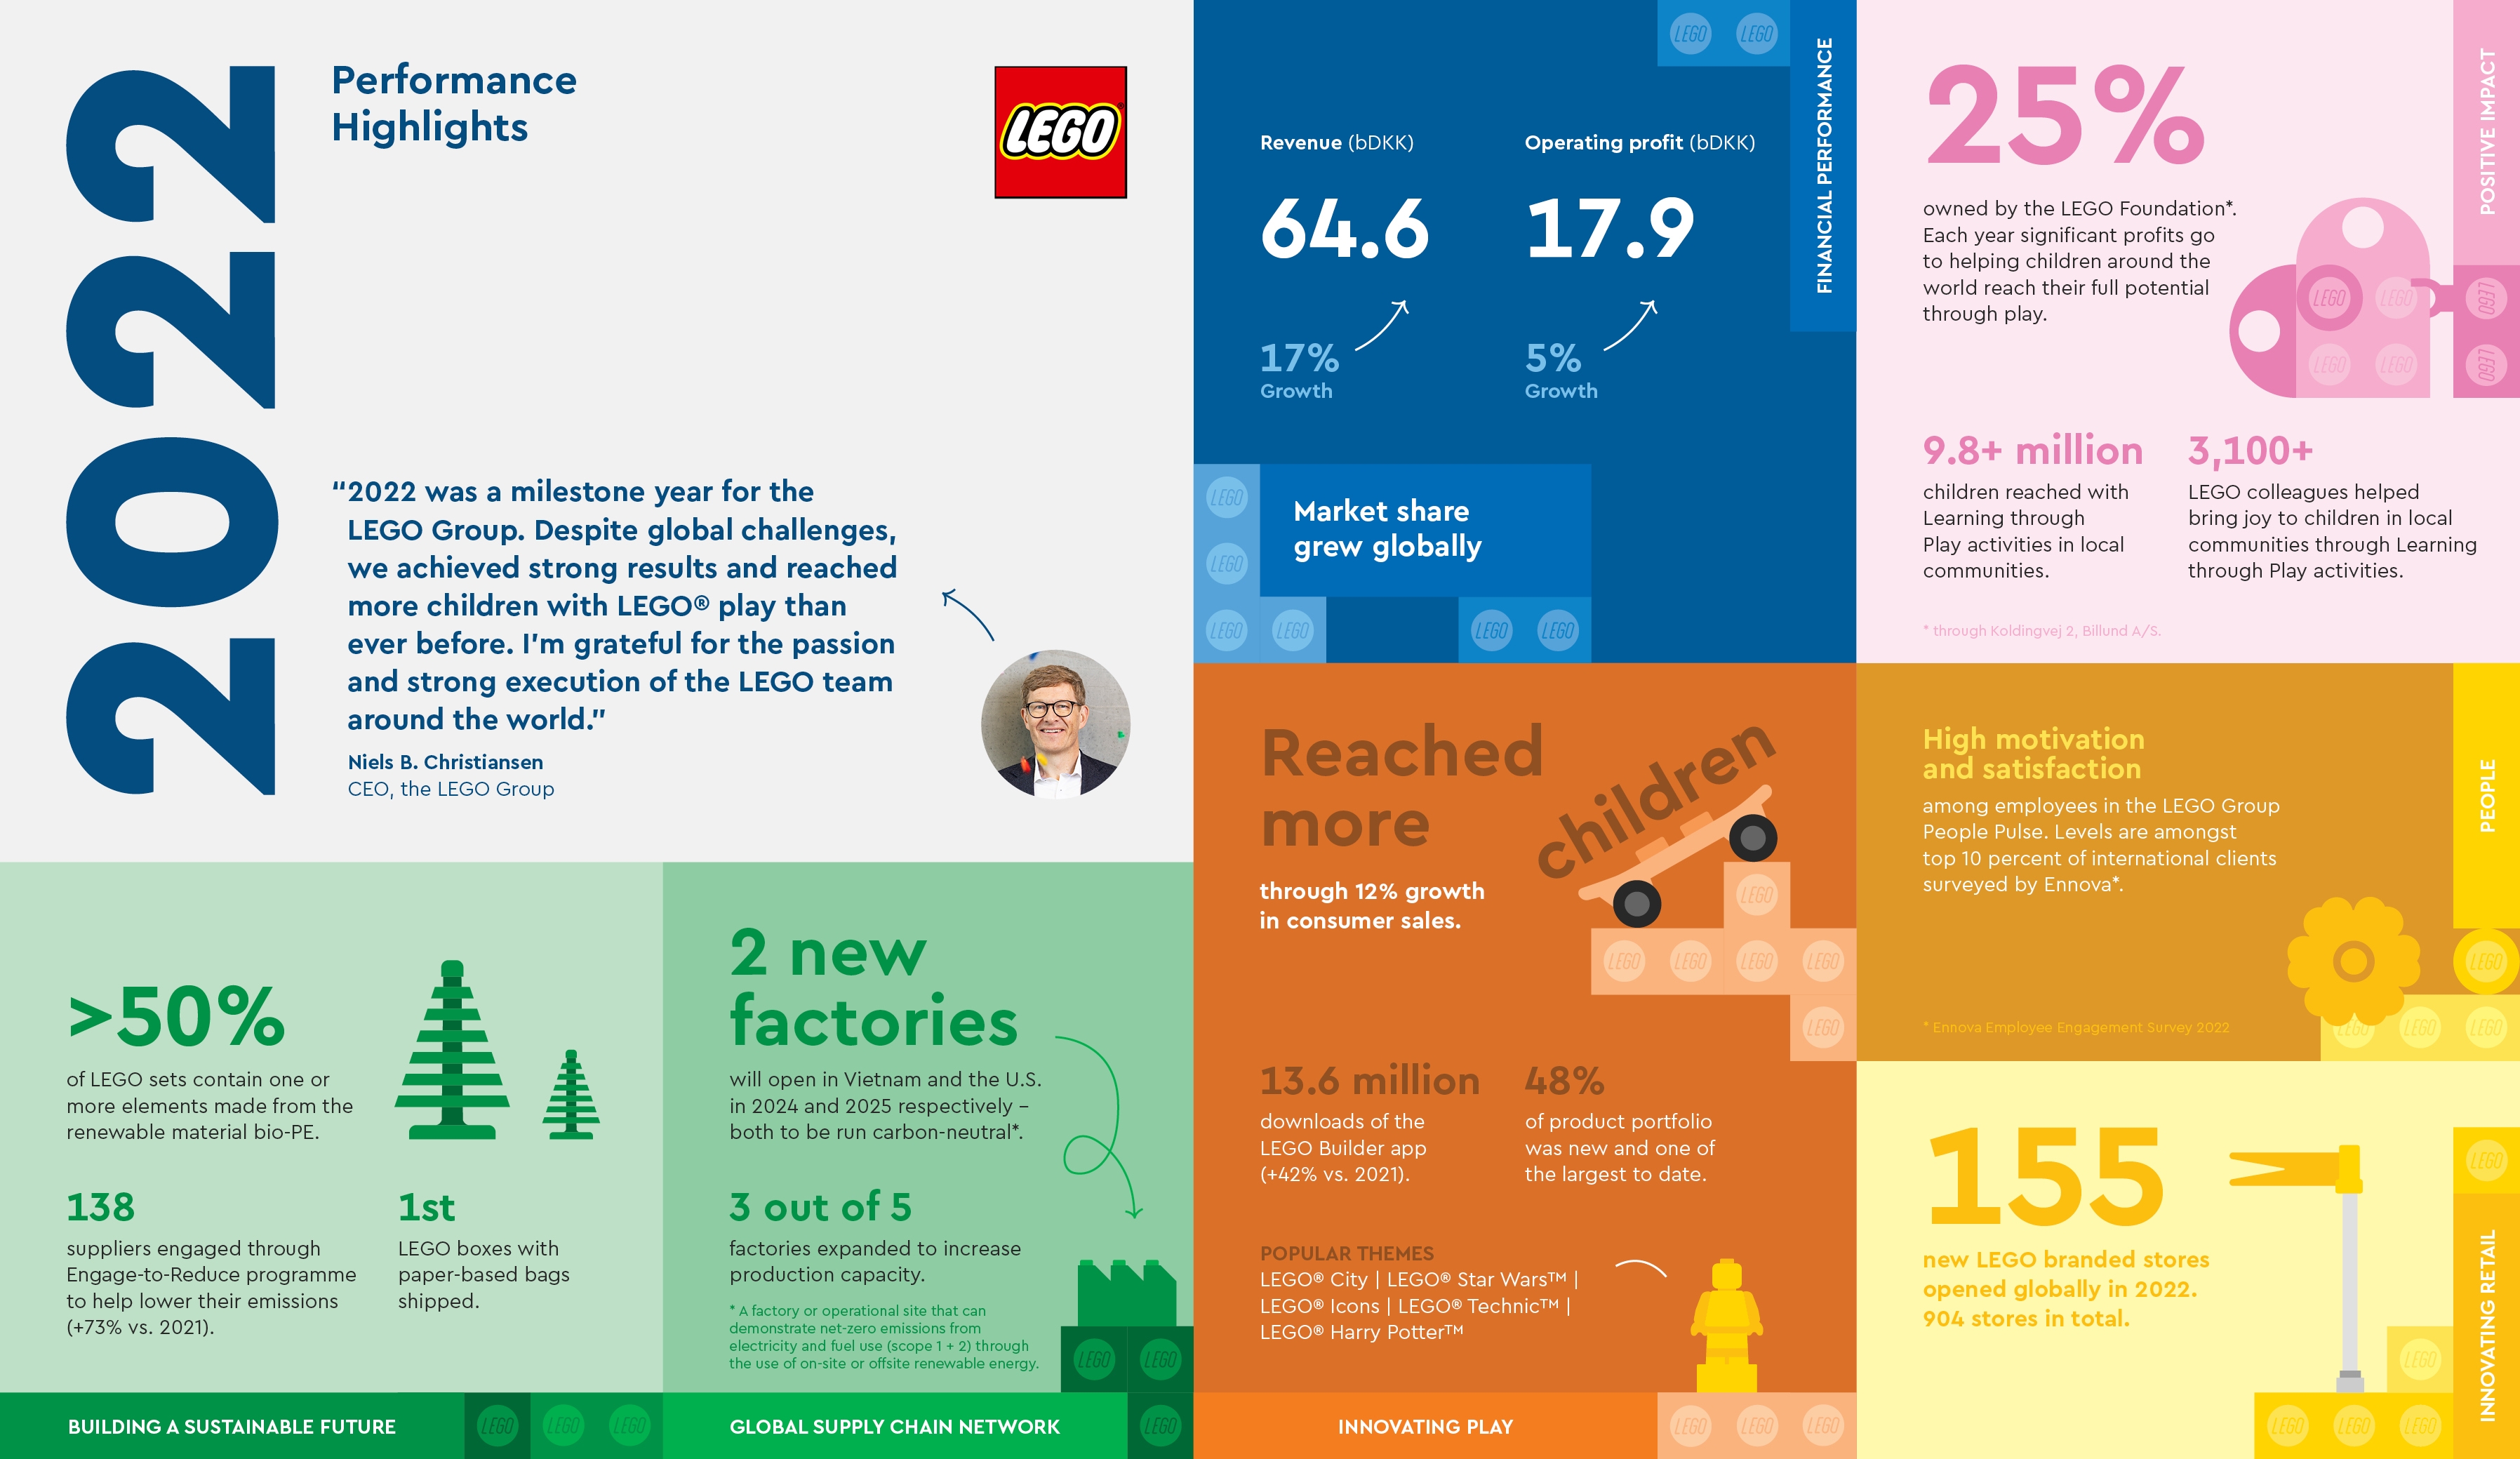 annual results - About Us - LEGO.com